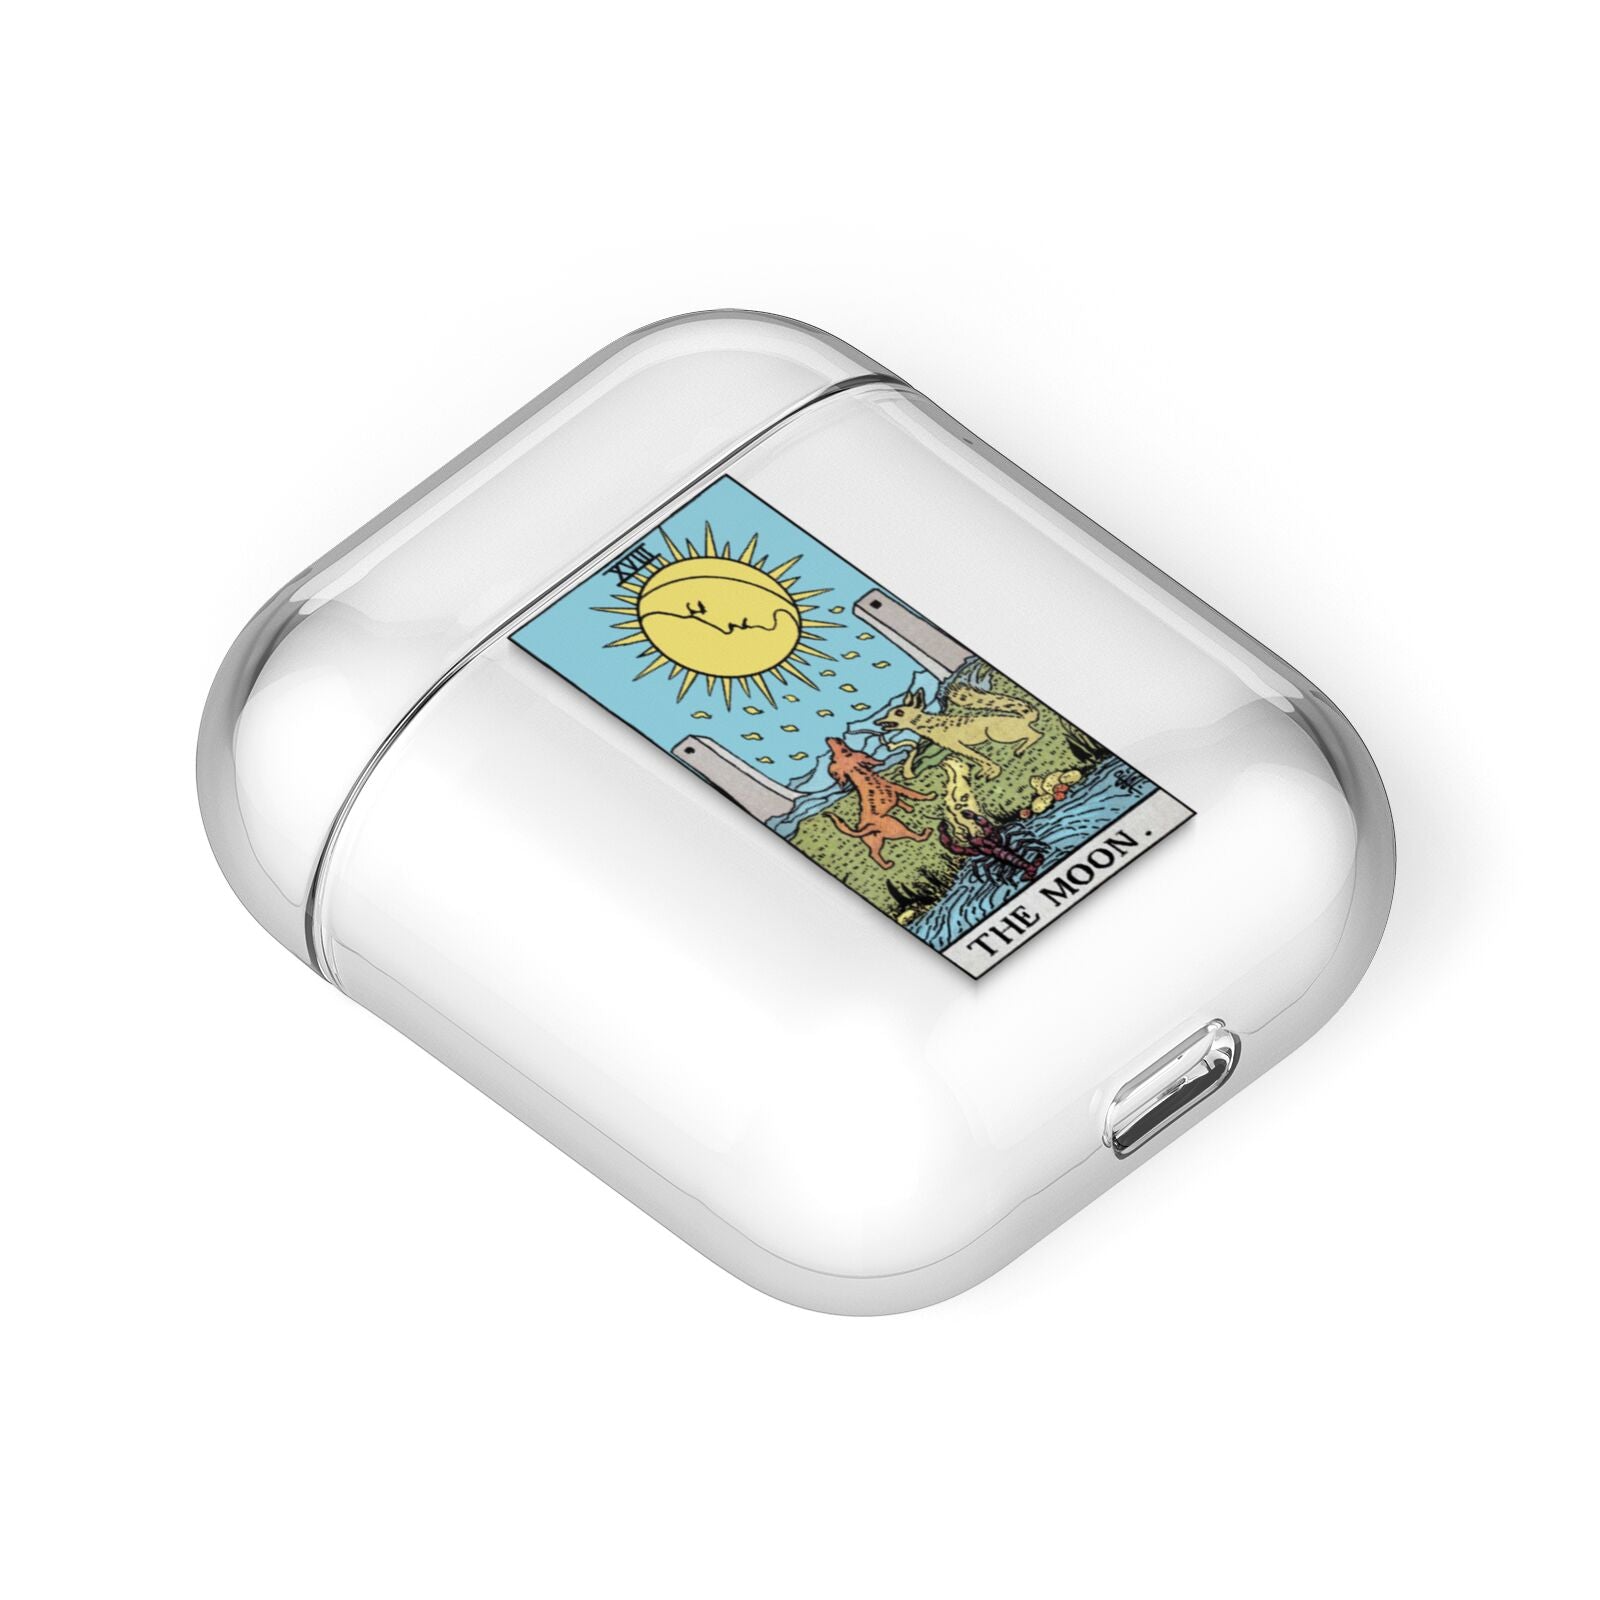 The Moon Tarot Card AirPods Case Laid Flat